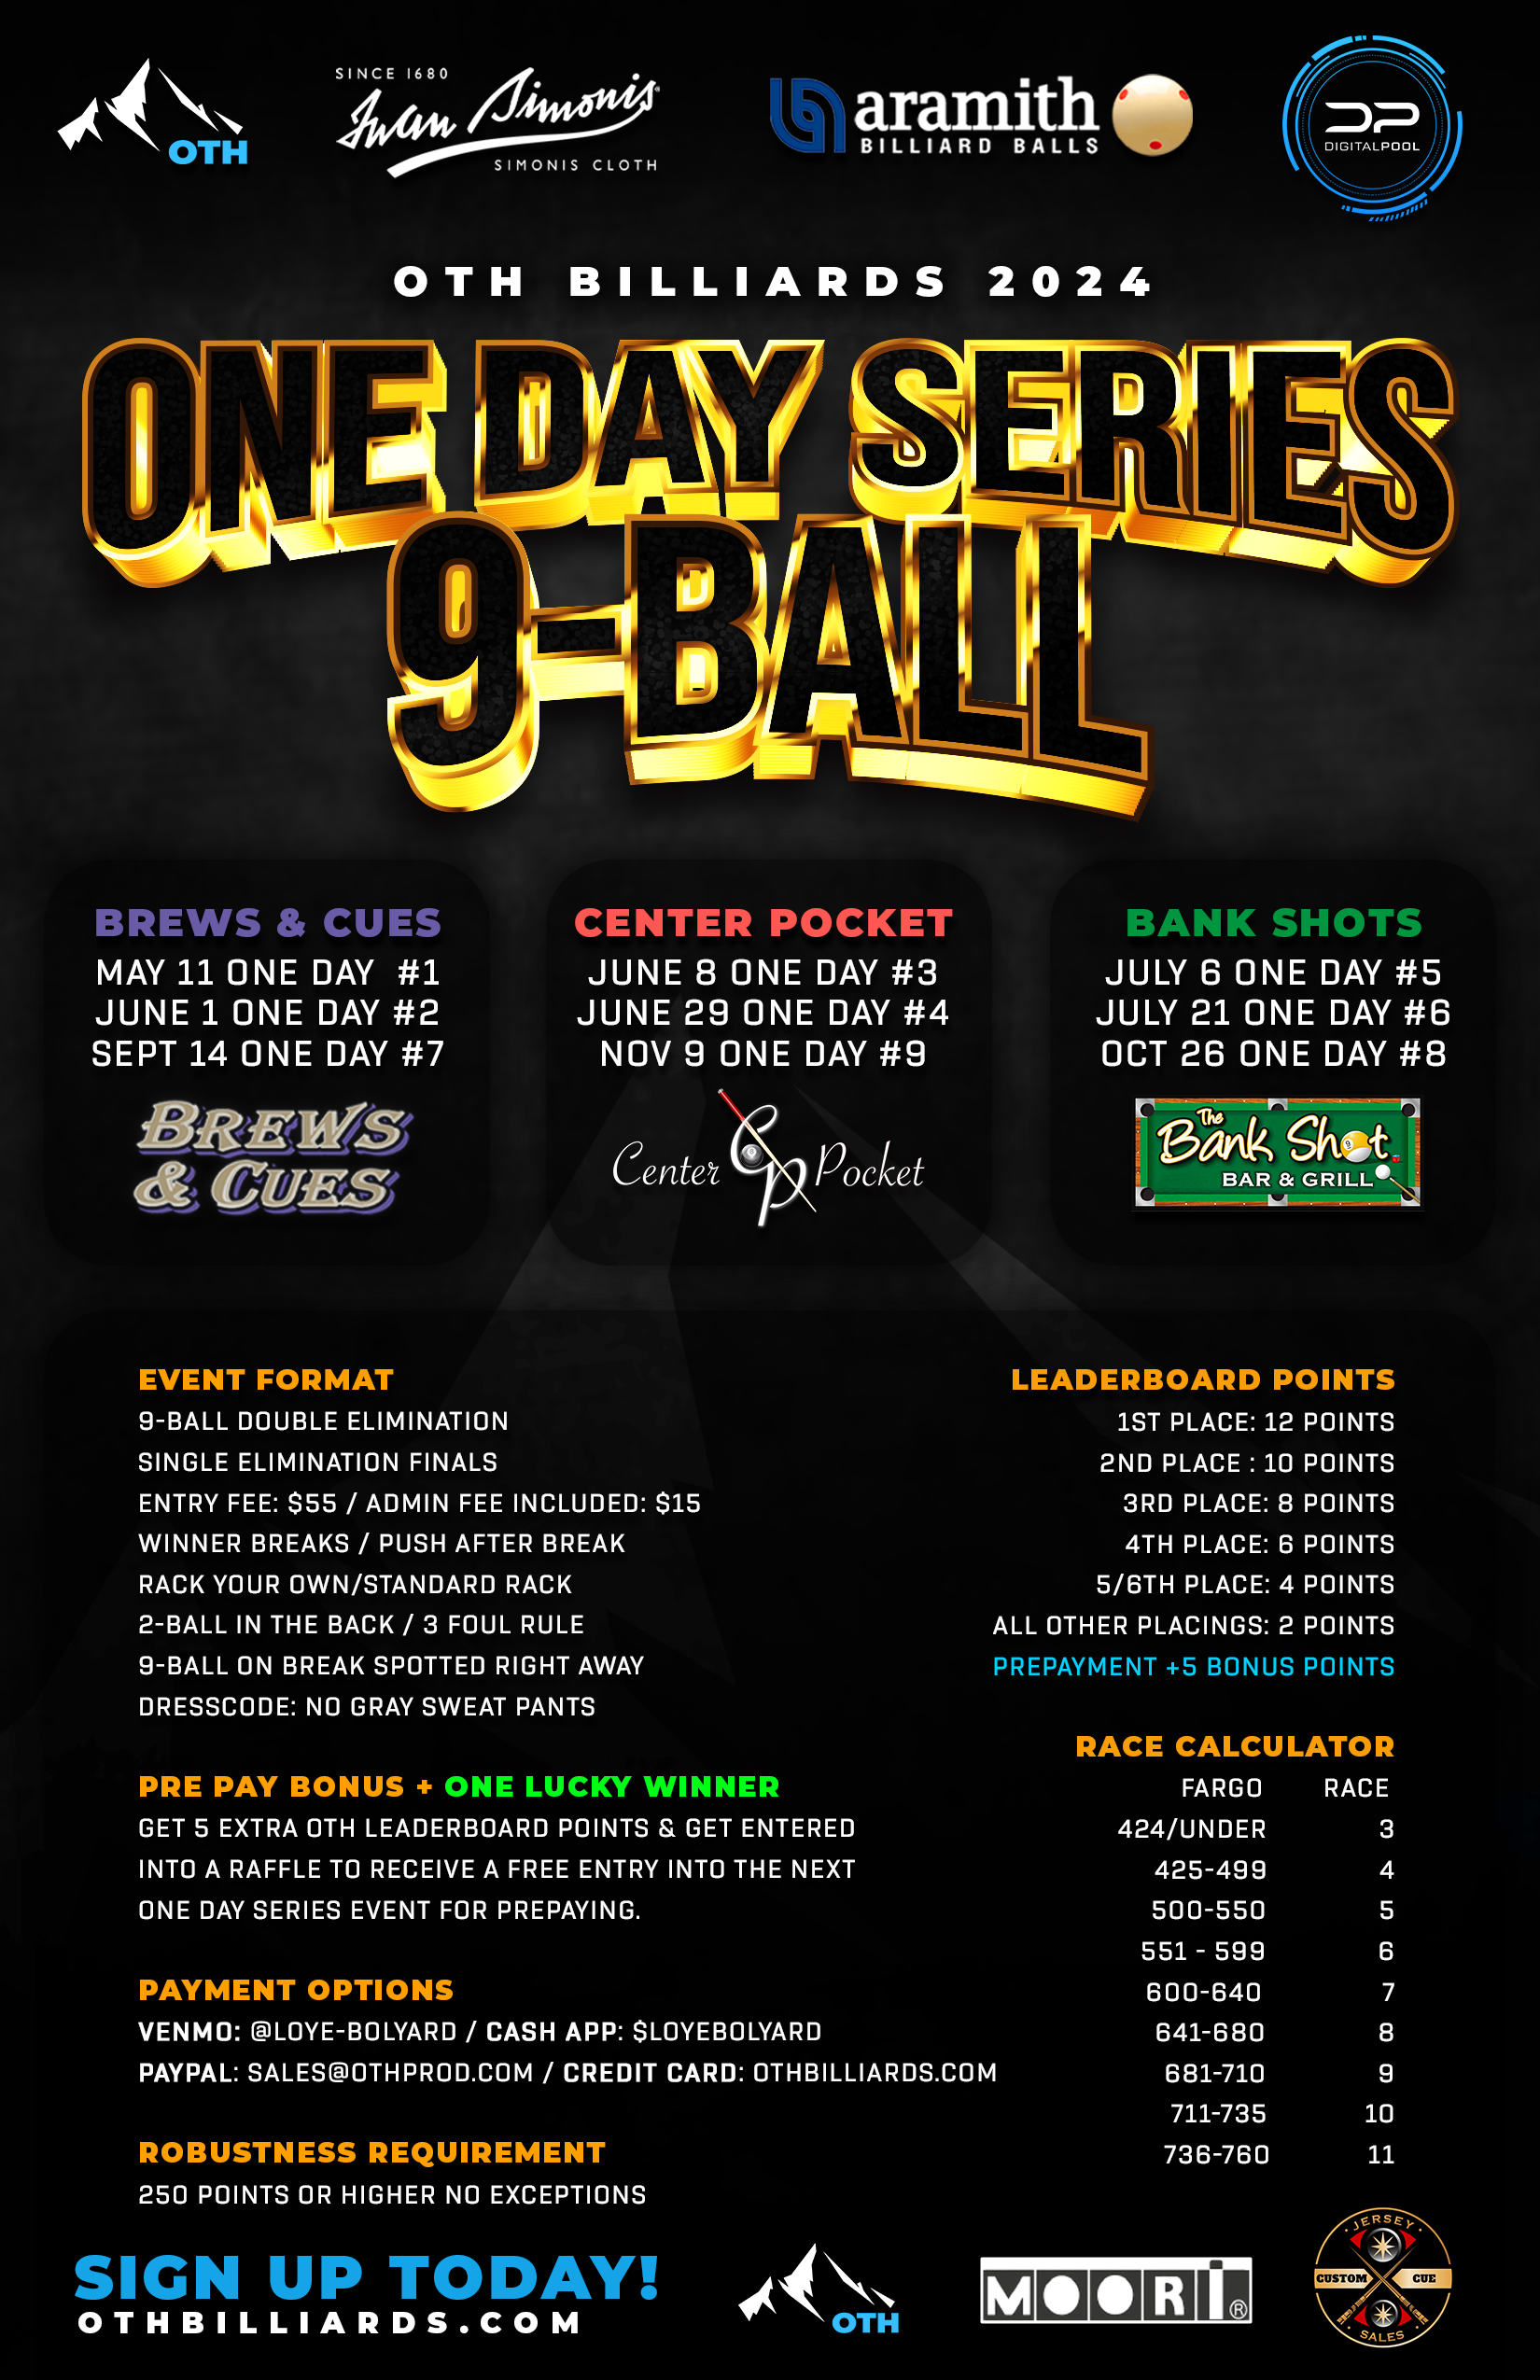 May 11 - Brews & Cues One Day Open 9-Ball Series Event #1